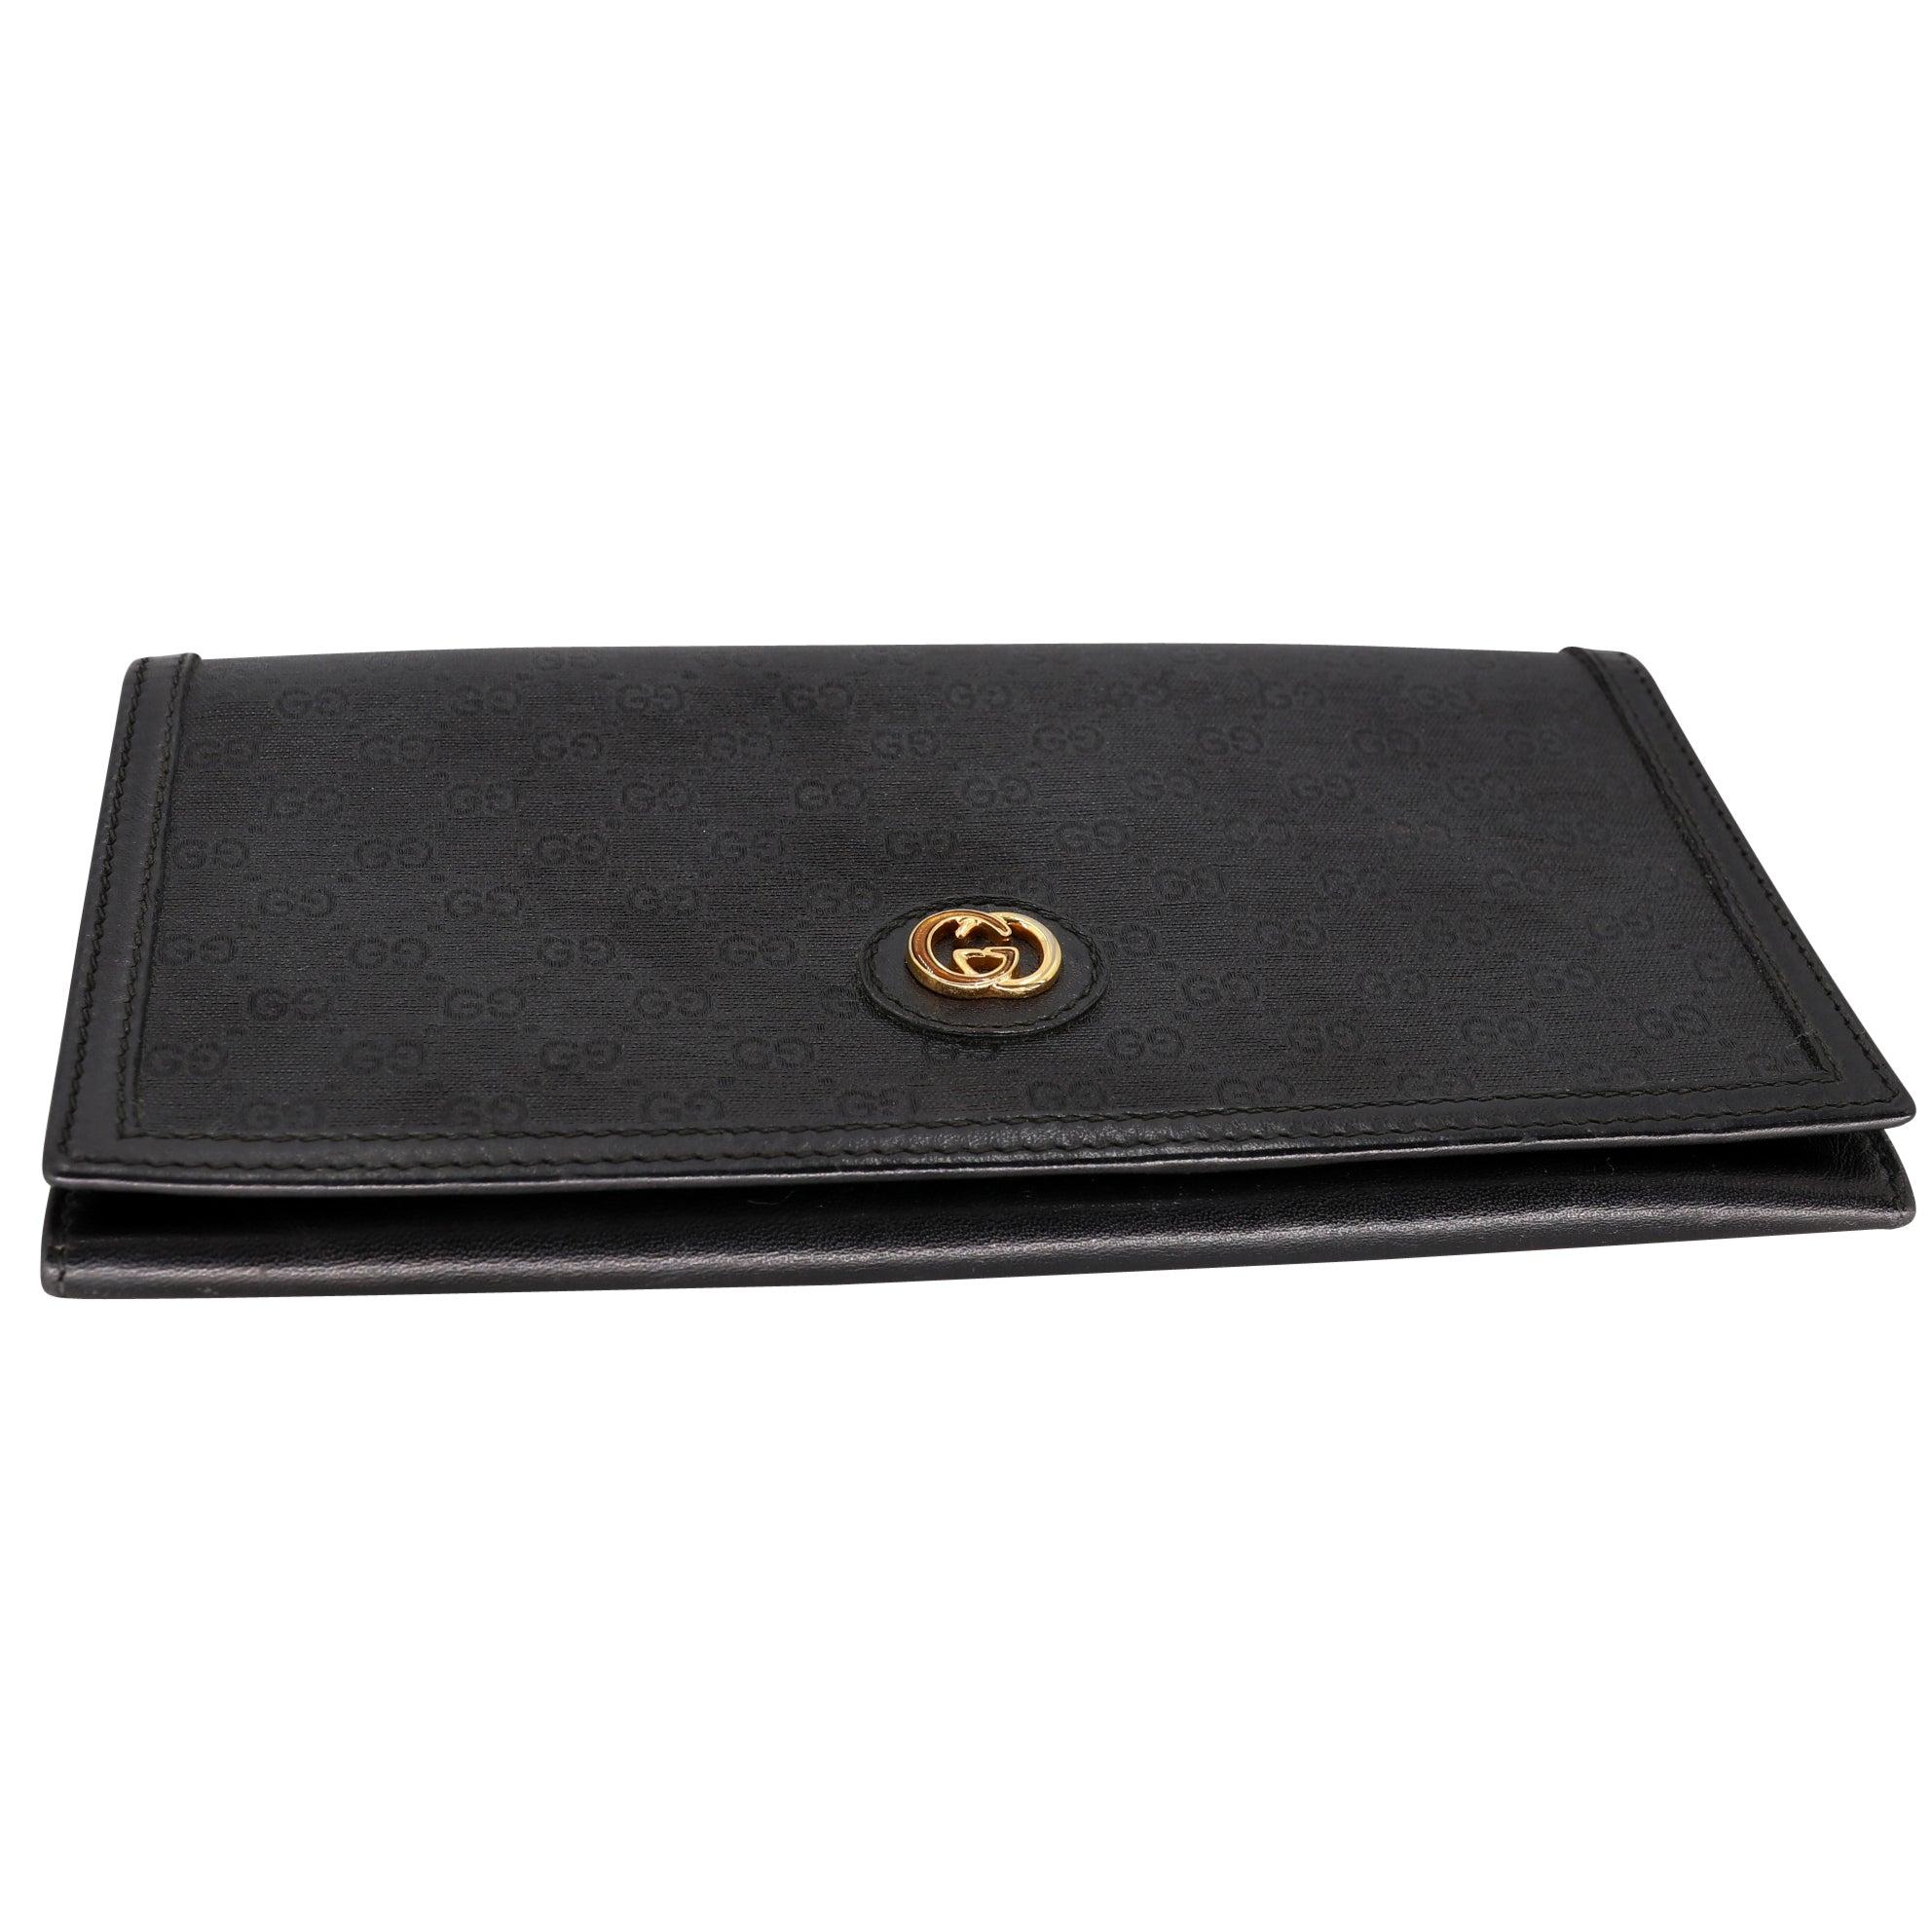 Gucci Monogram Leather Bi-Fold Long Wallet GG-W1017P-A003 In Good Condition For Sale In Downey, CA